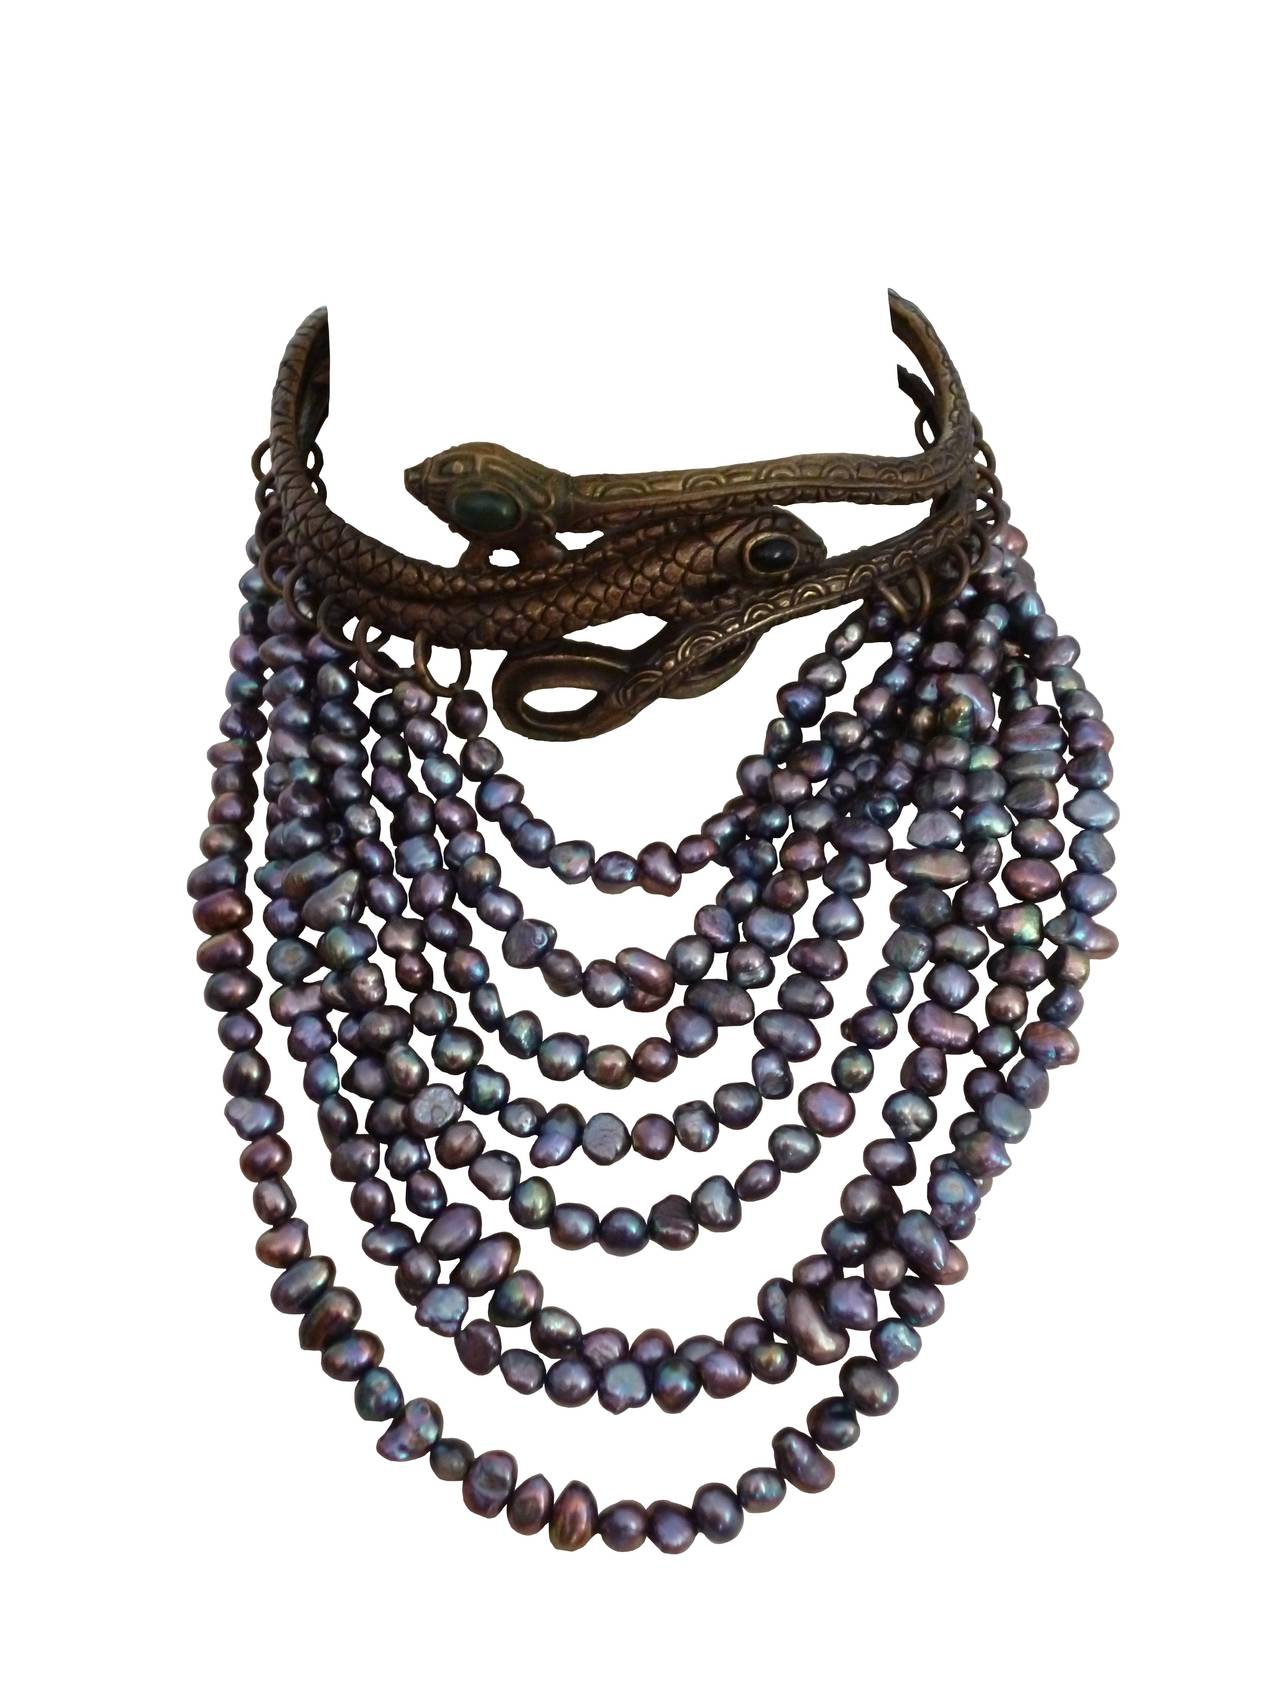 VALENTINO GARAVANI rare runway snake choker necklace.

The top has a rigid section of two intertwined bronze snakes with green and black stones. Antique patina.
Height rows of baroque iridescent freshwater pearl pearls. 
The reverse side has two